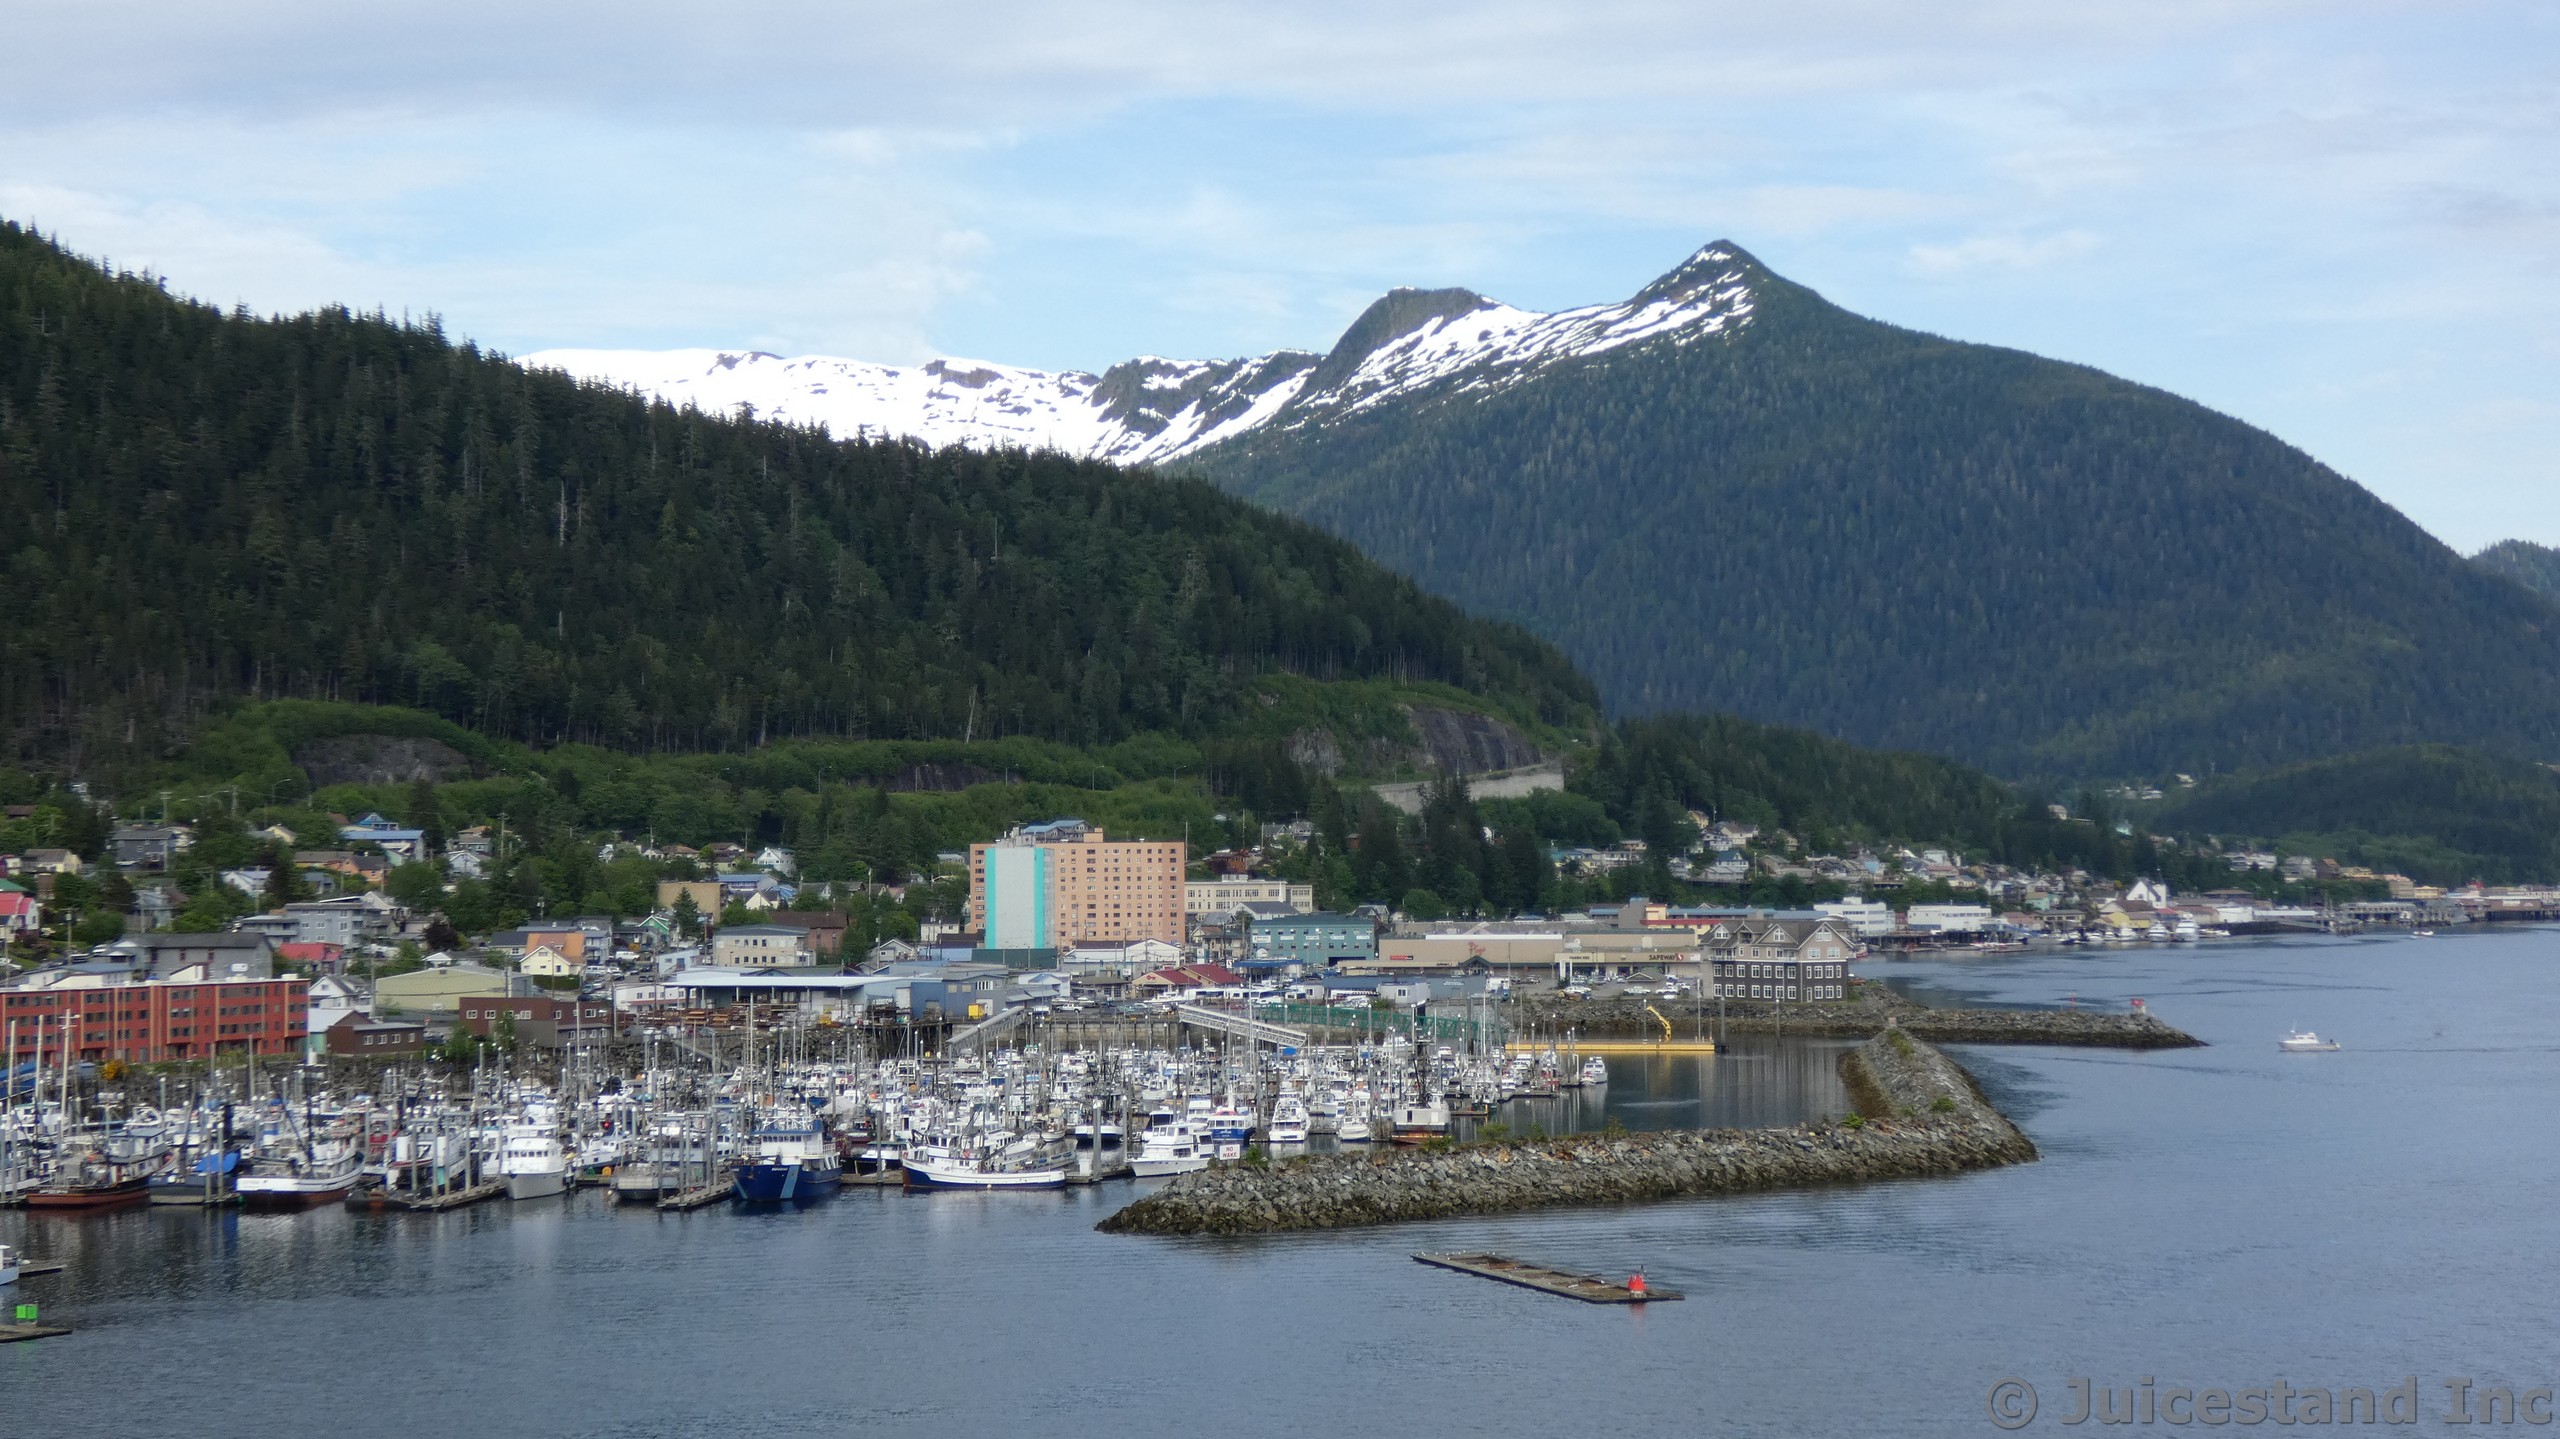 Ketchikan Marina with Mountain in the Background
